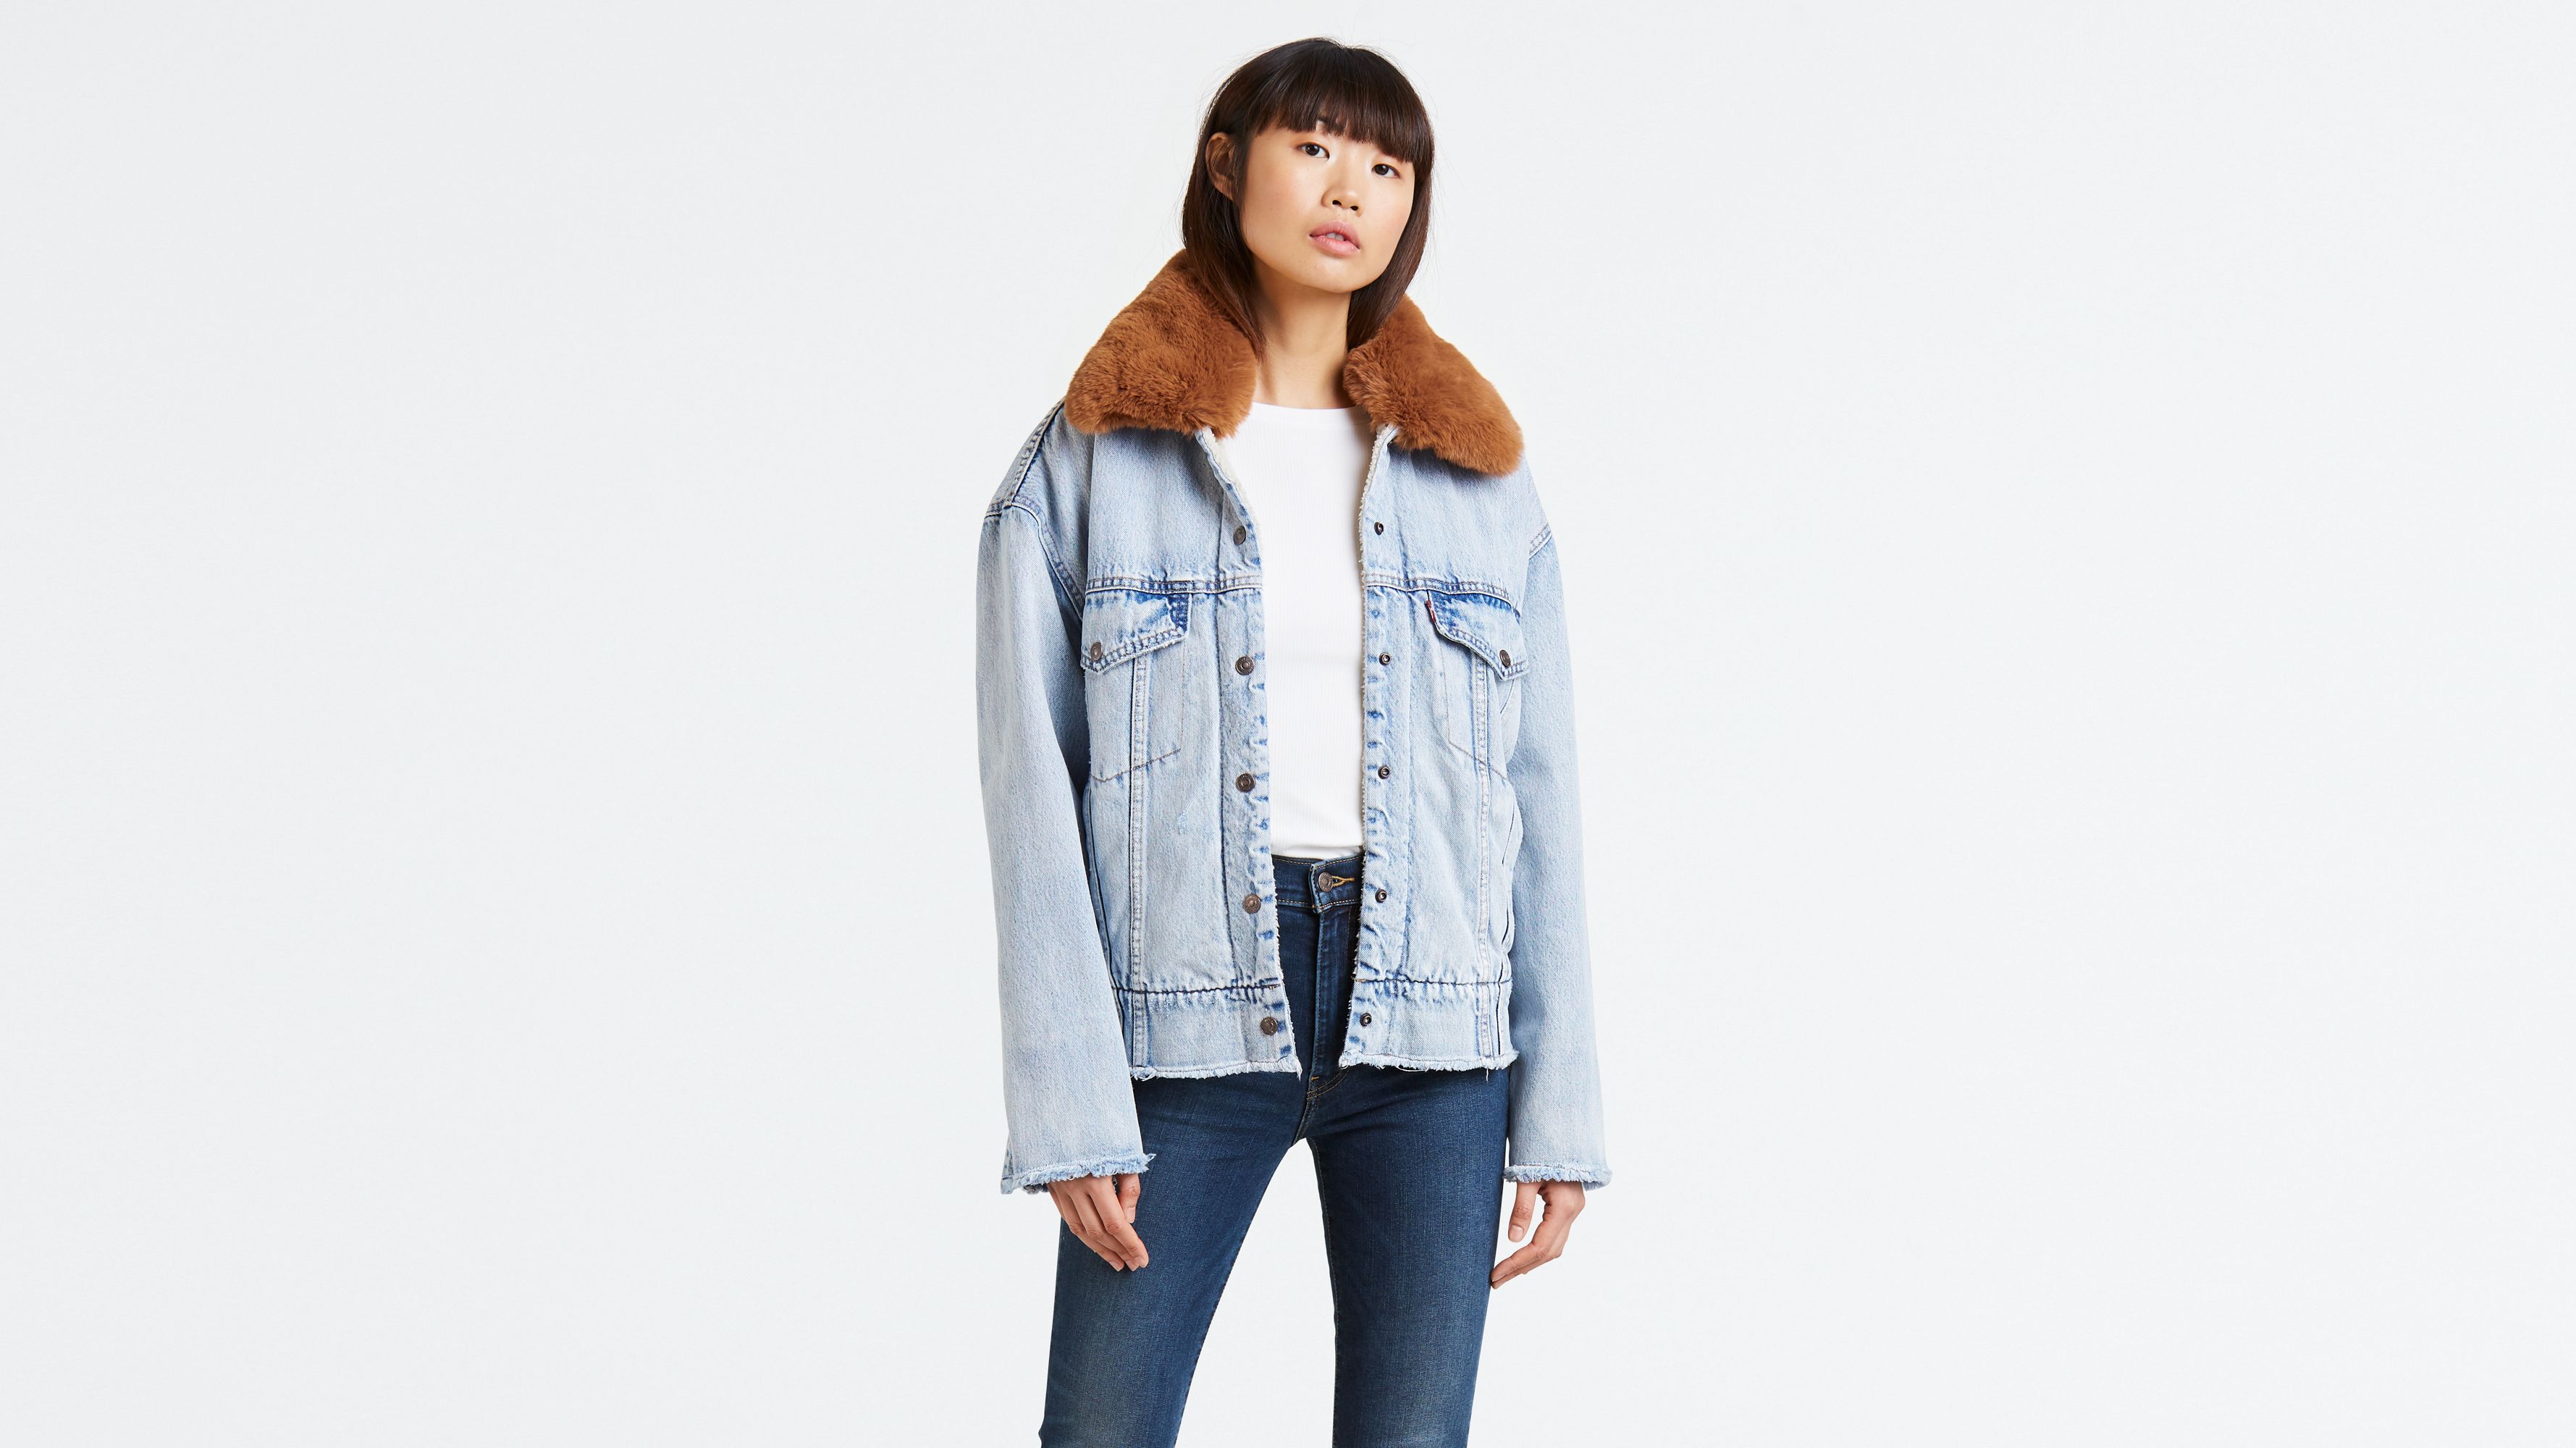 Long Sleeve Shearling Lined Denim Jeans Jacket with Detachable Fur Collar &  Cuff | Stylish jackets, Long sleeve denim jacket, Lined denim jacket